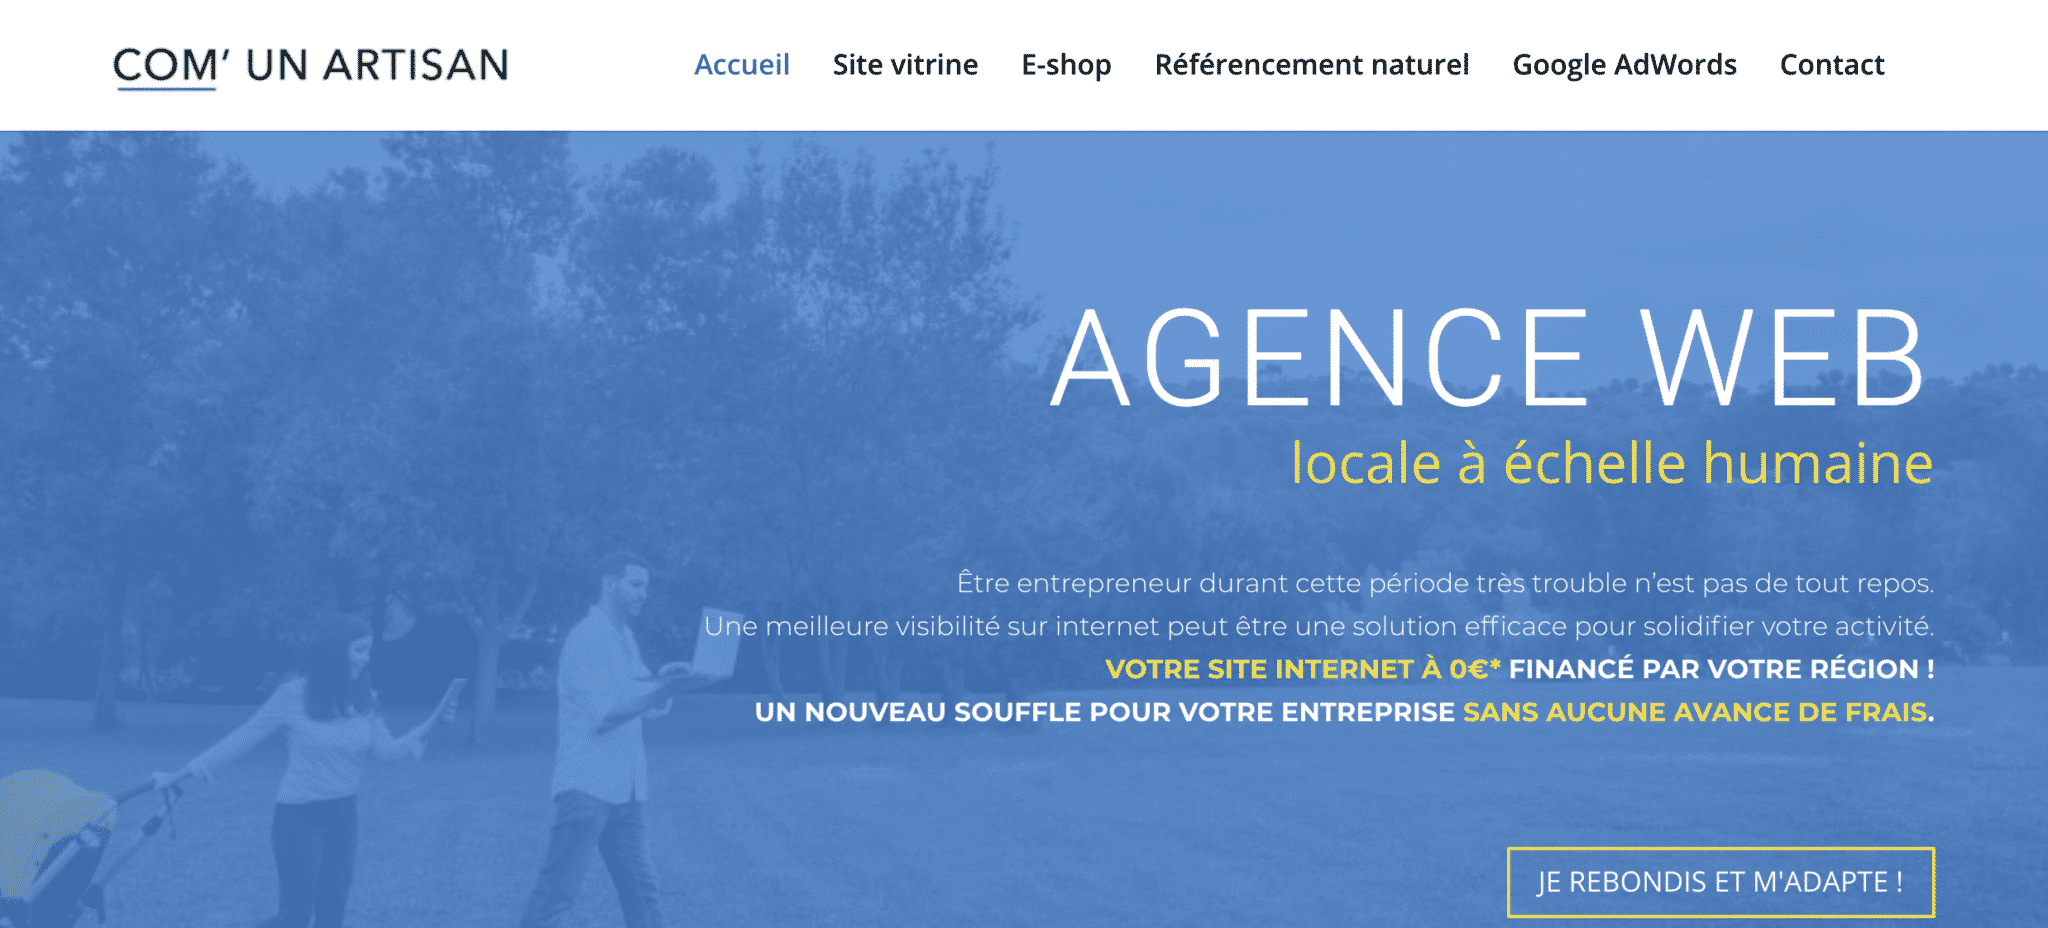 creer site web artisan exemple agence